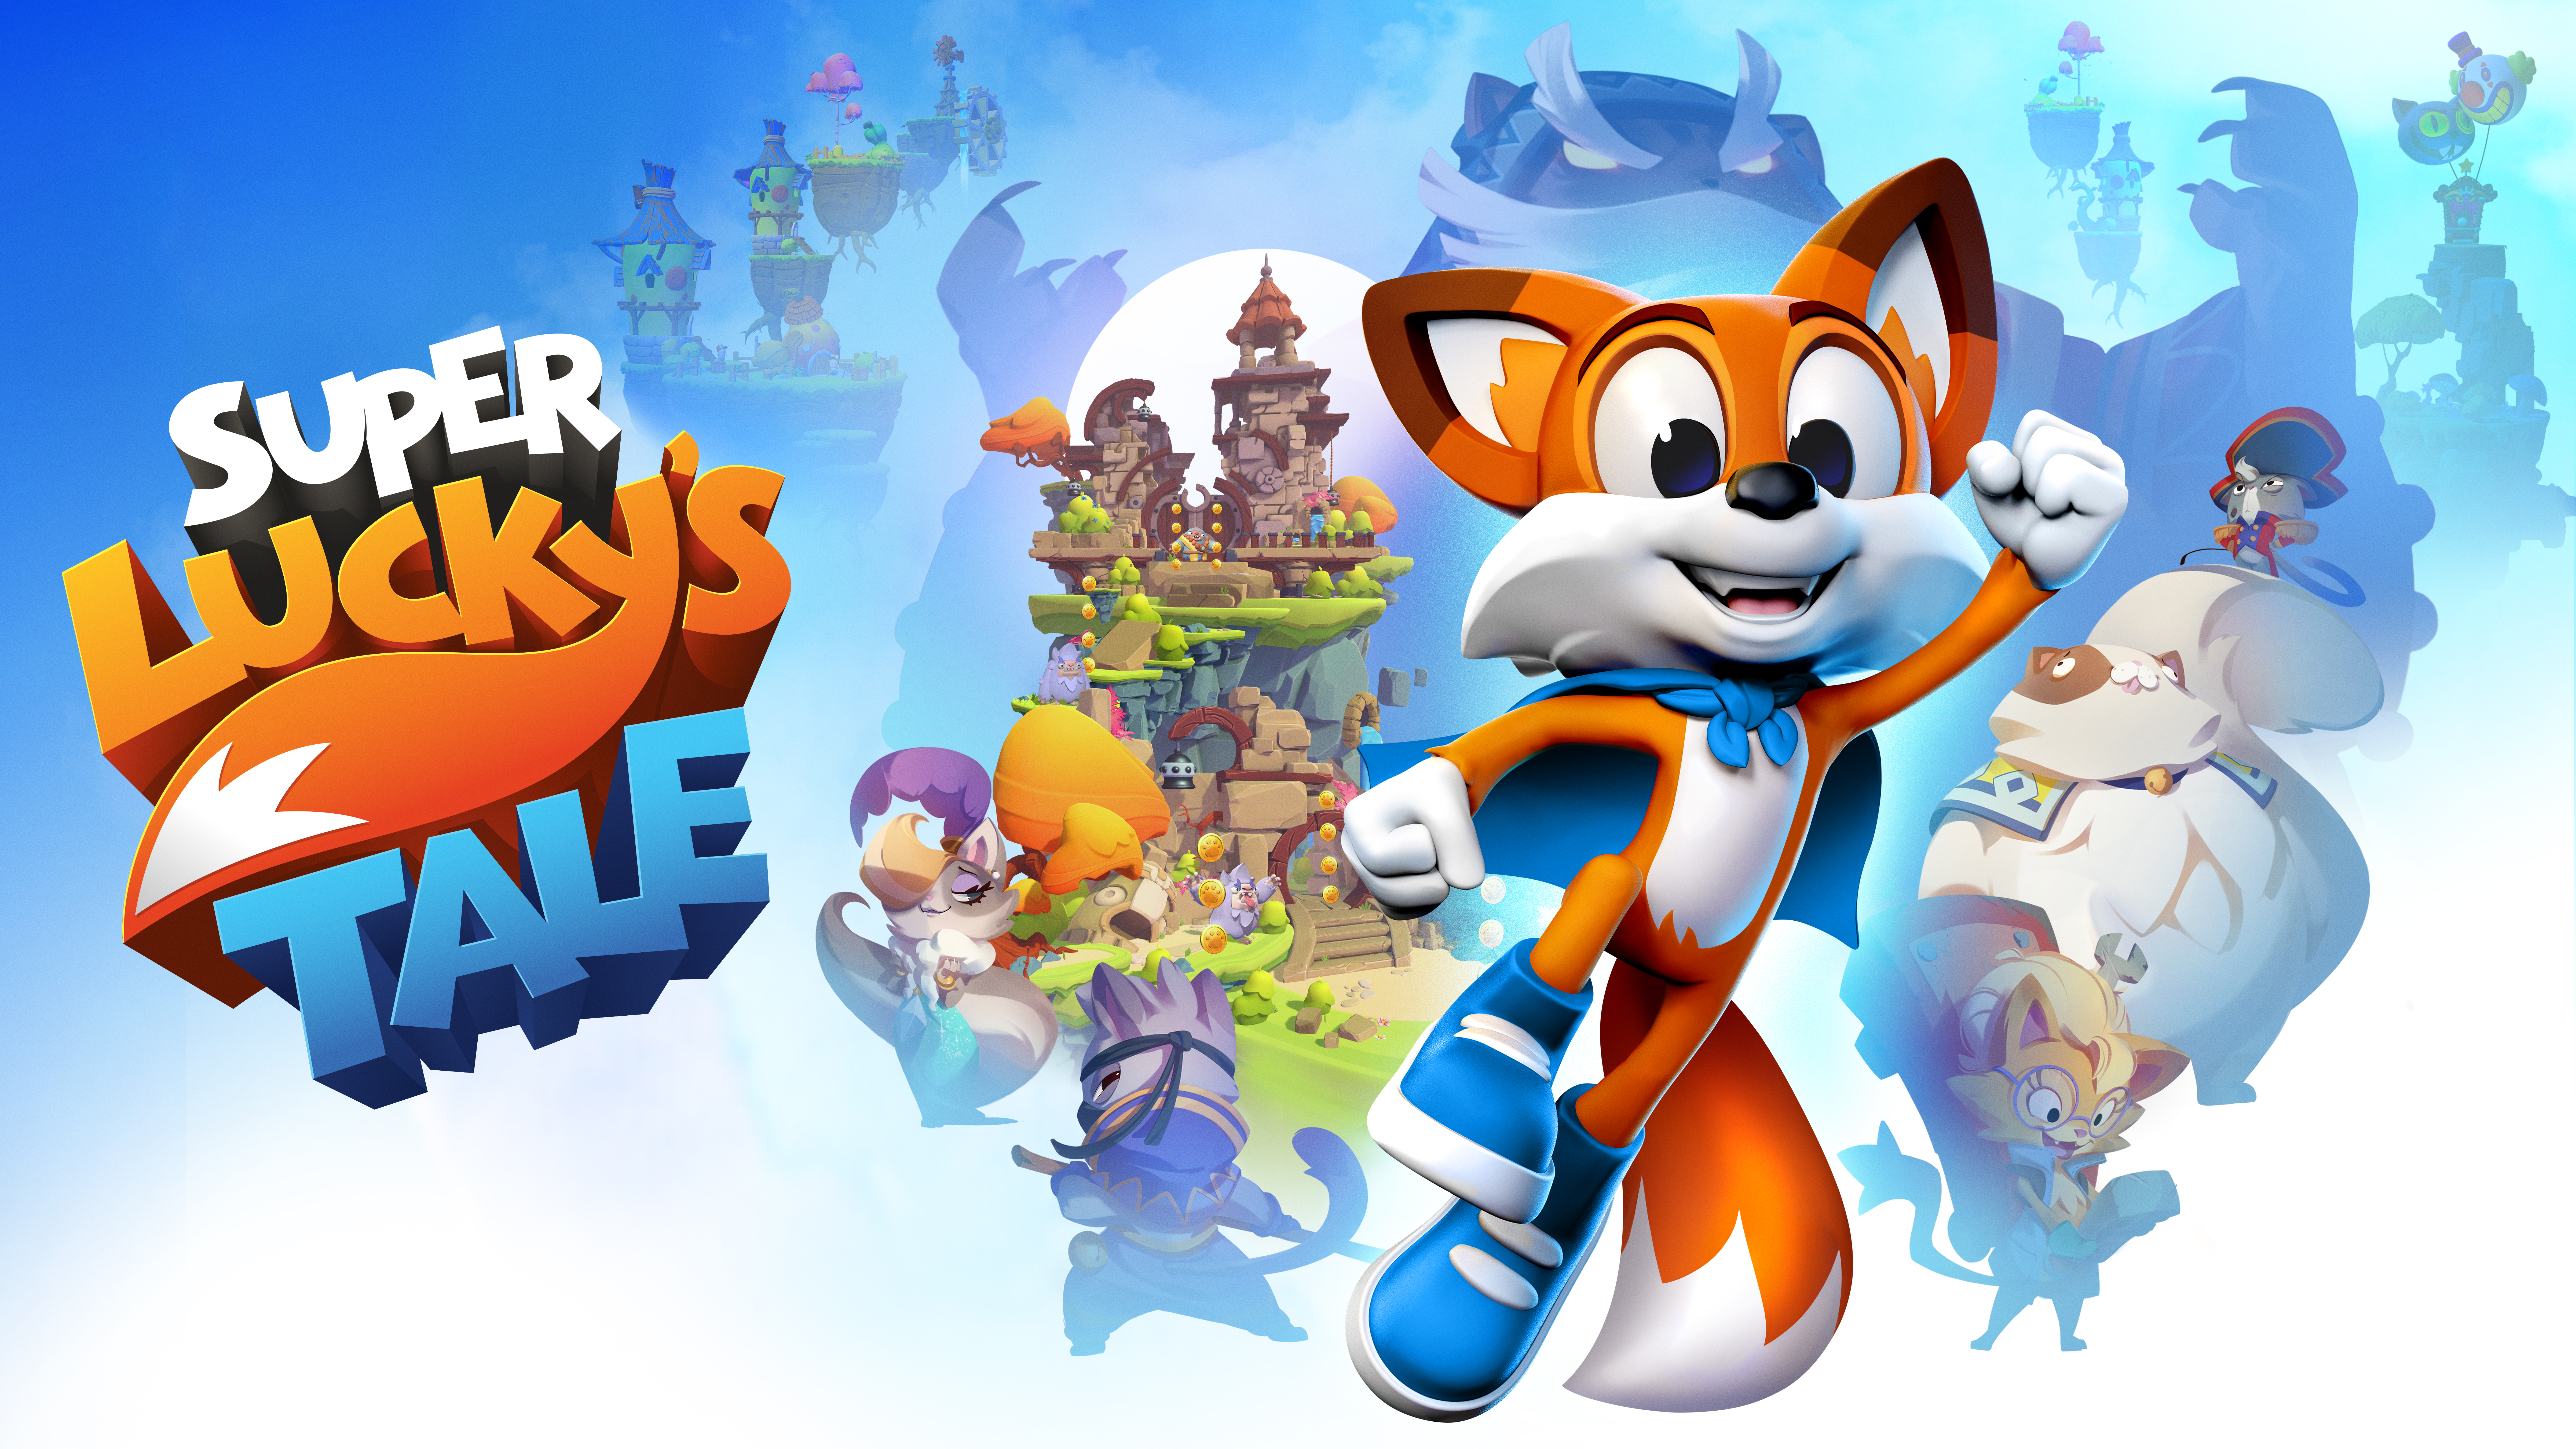 E3 2017: Welcome to Adventure with Super Lucky's Tale - Xbox Wire